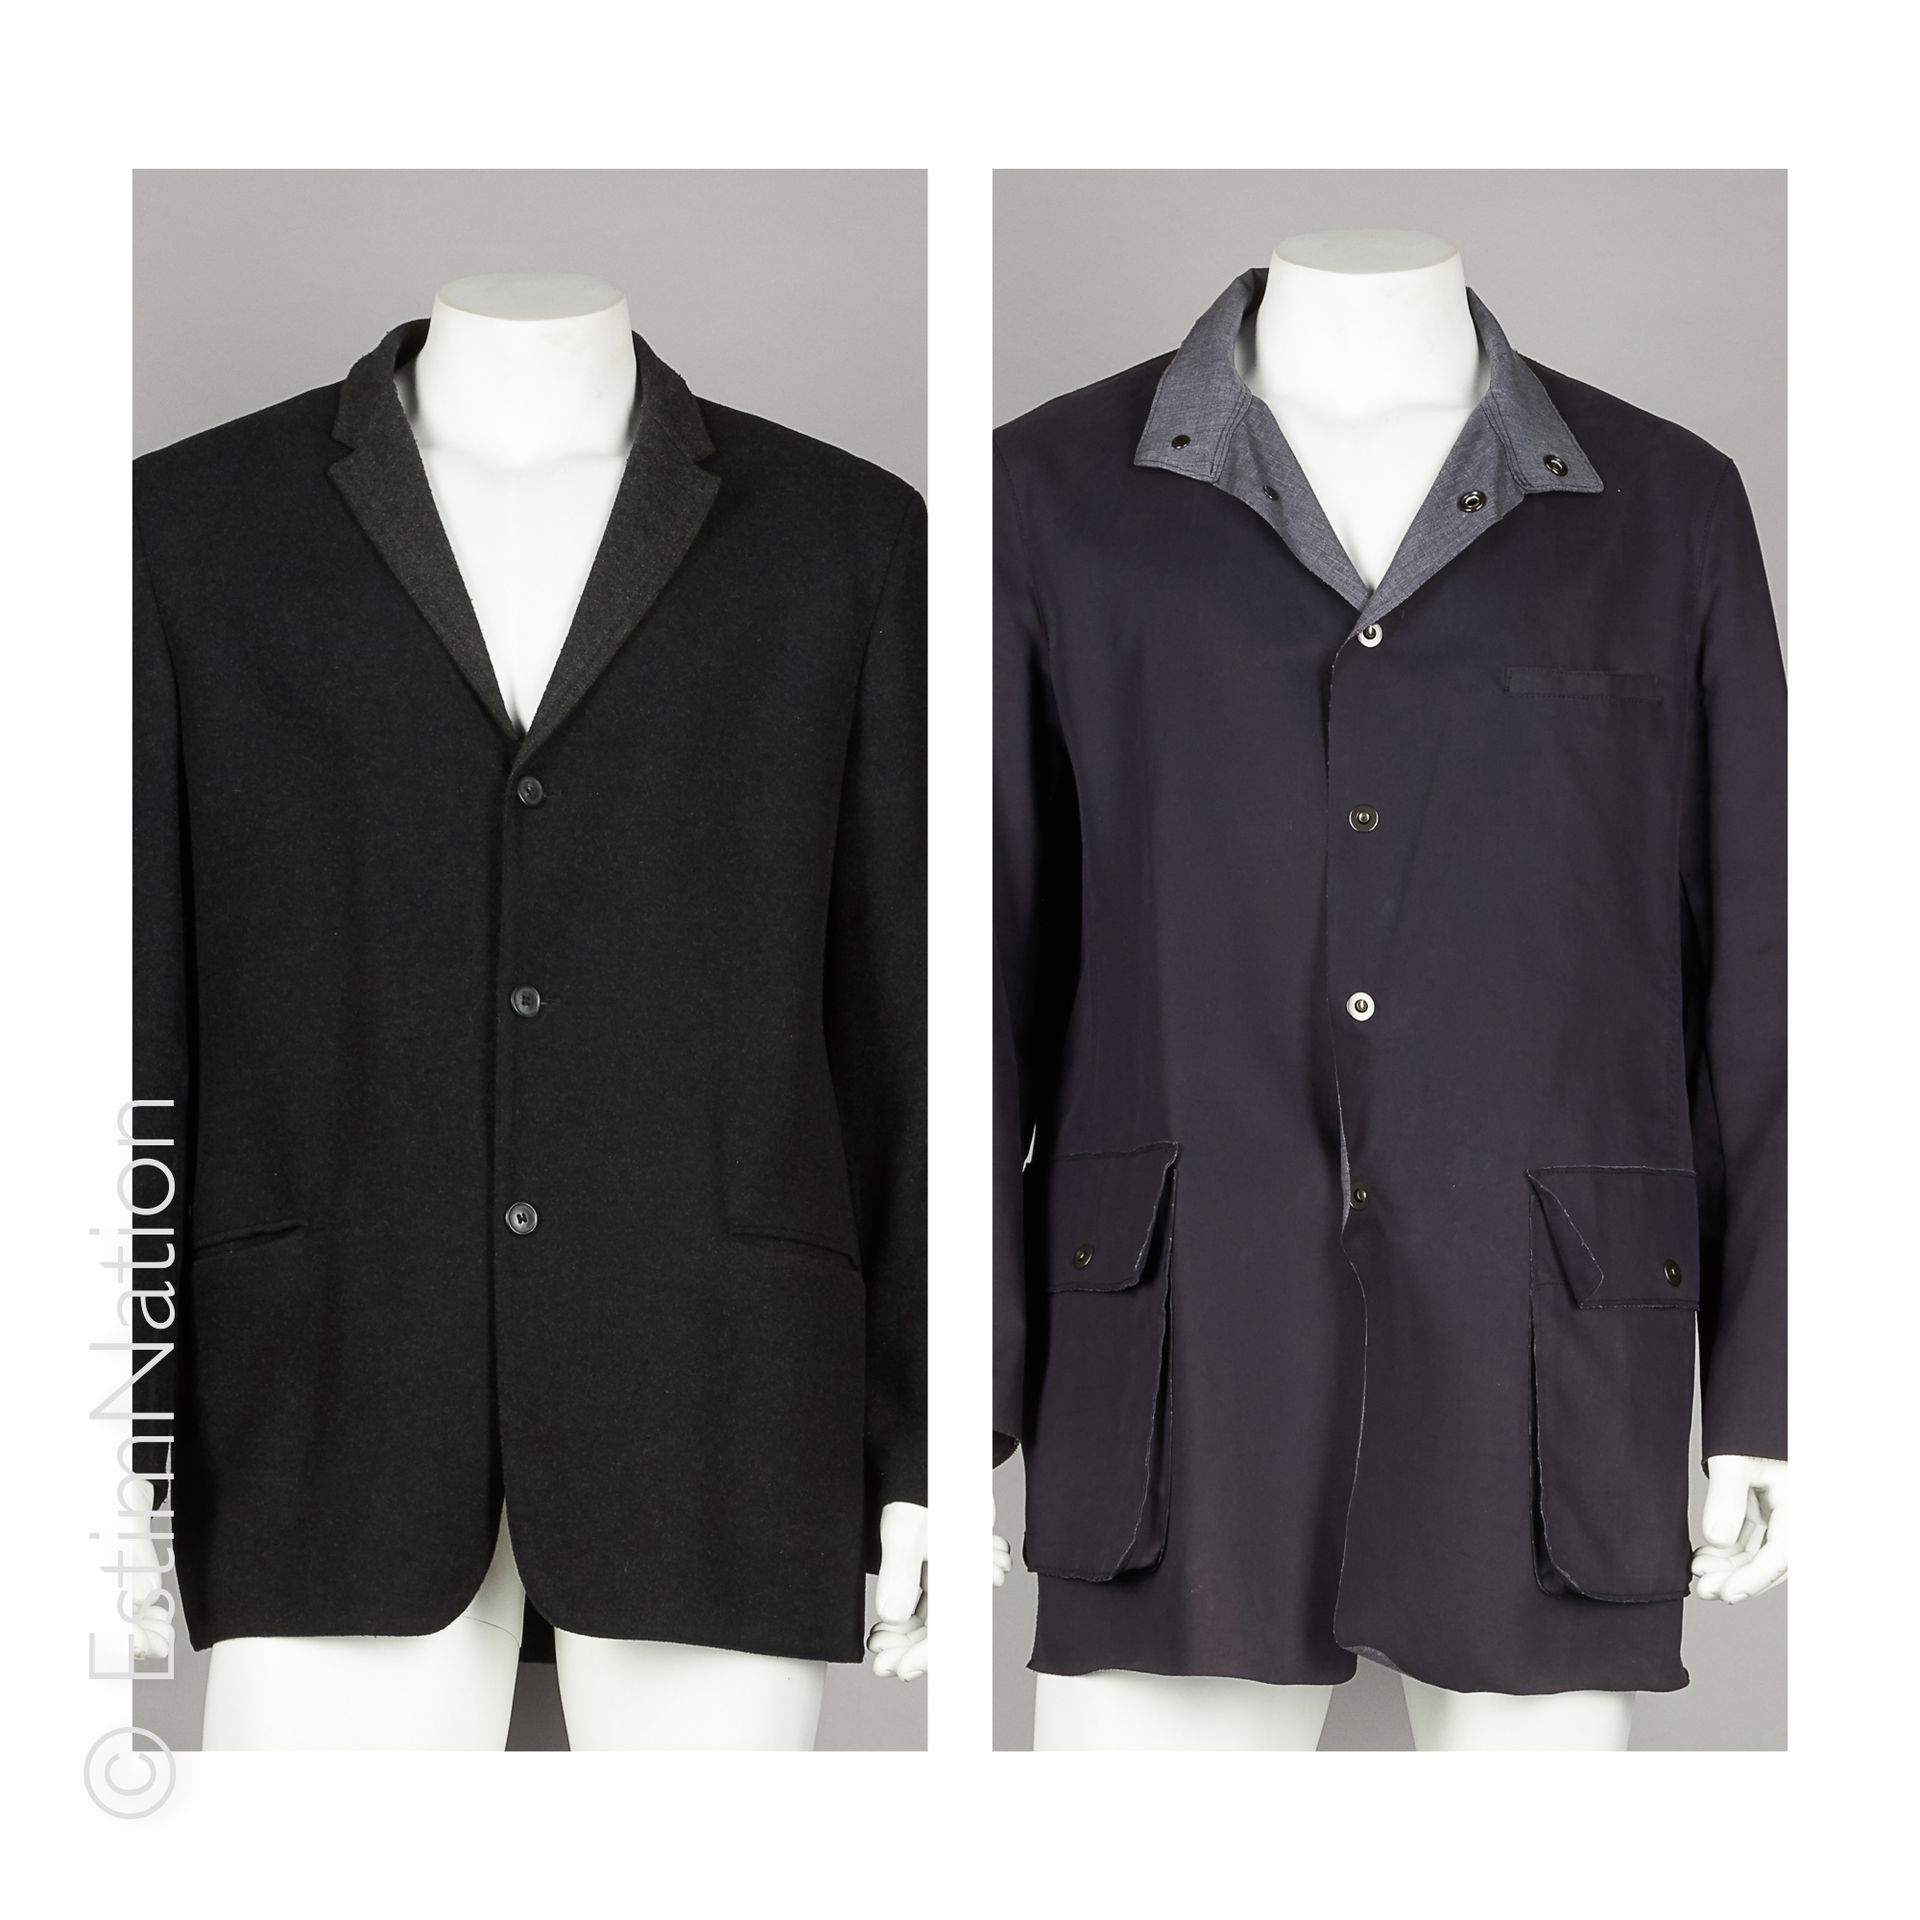 CALVIN KLEIN, EMPORIO ARMANI Double-faced anthracite wool felt blended jacket, g&hellip;